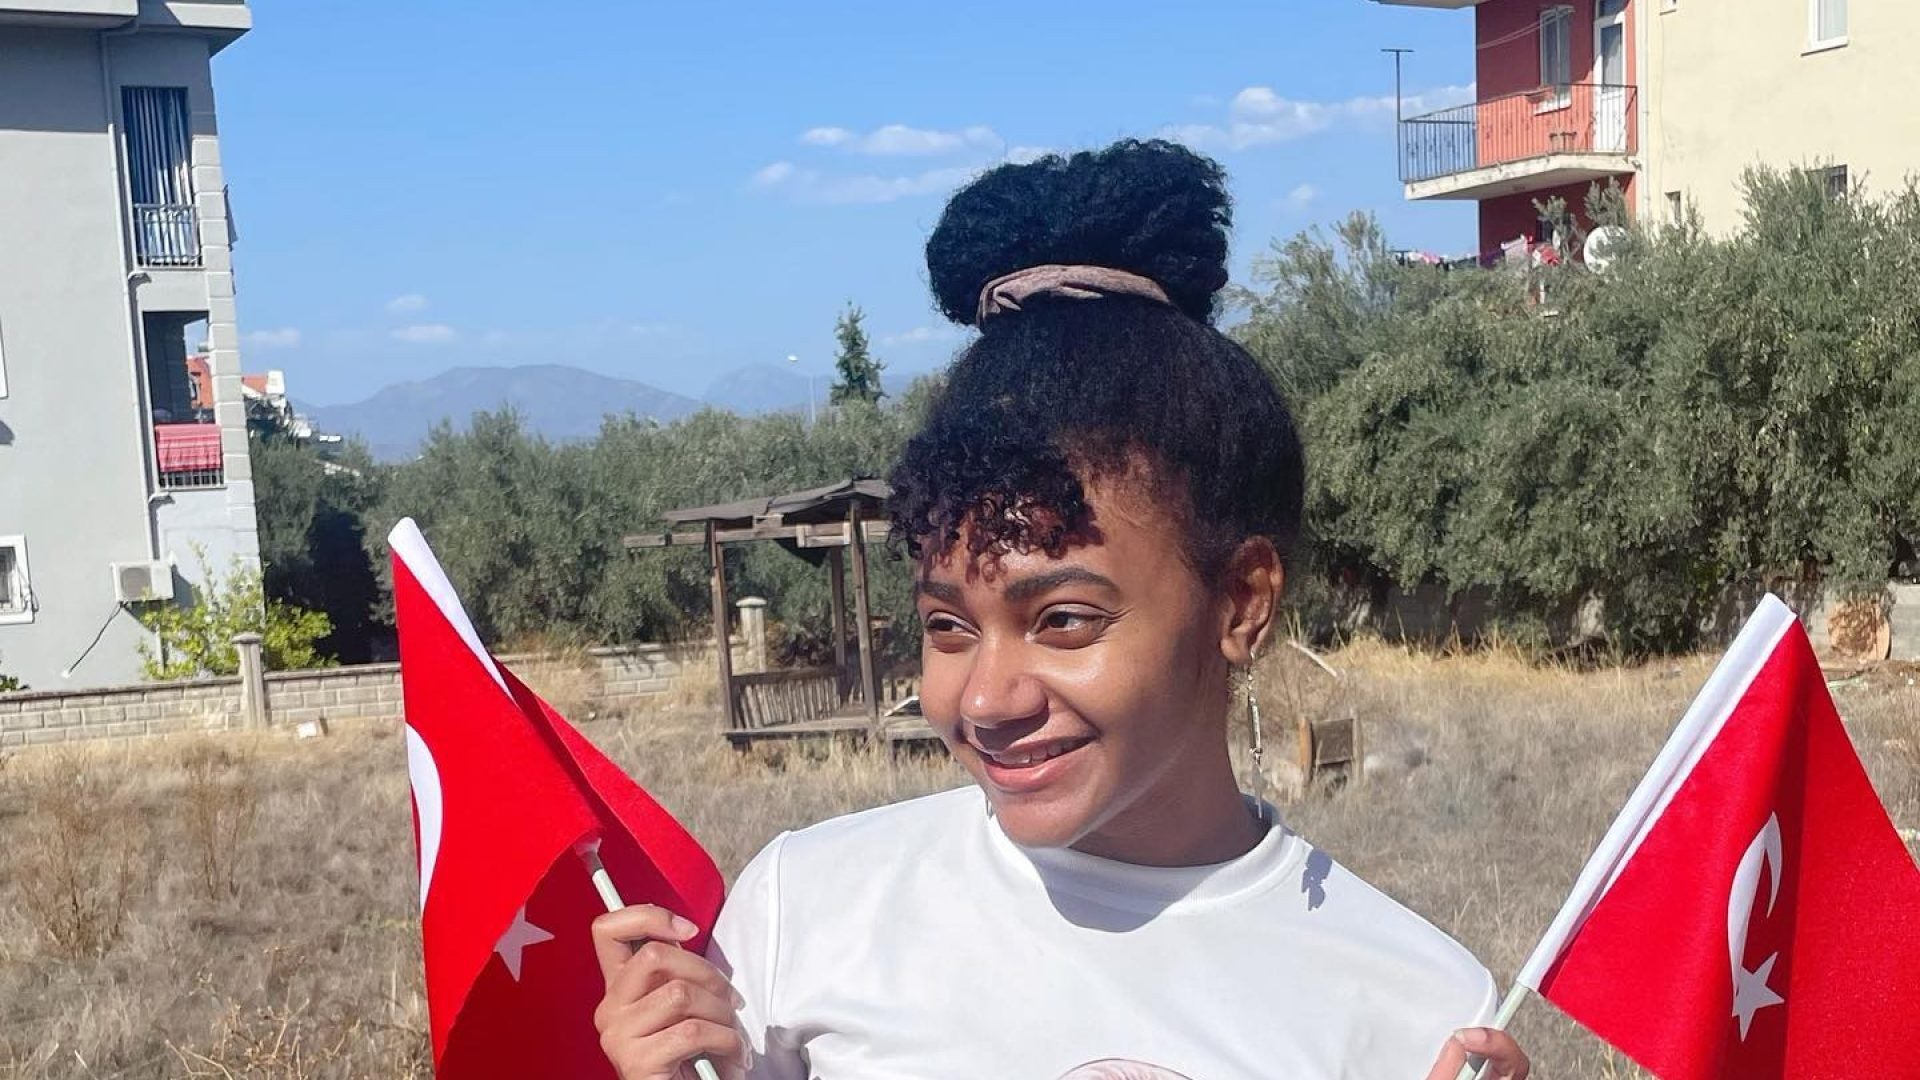 Viral Expat Artemis Peacocke On Leaving The United States And Finding Community In Turkey